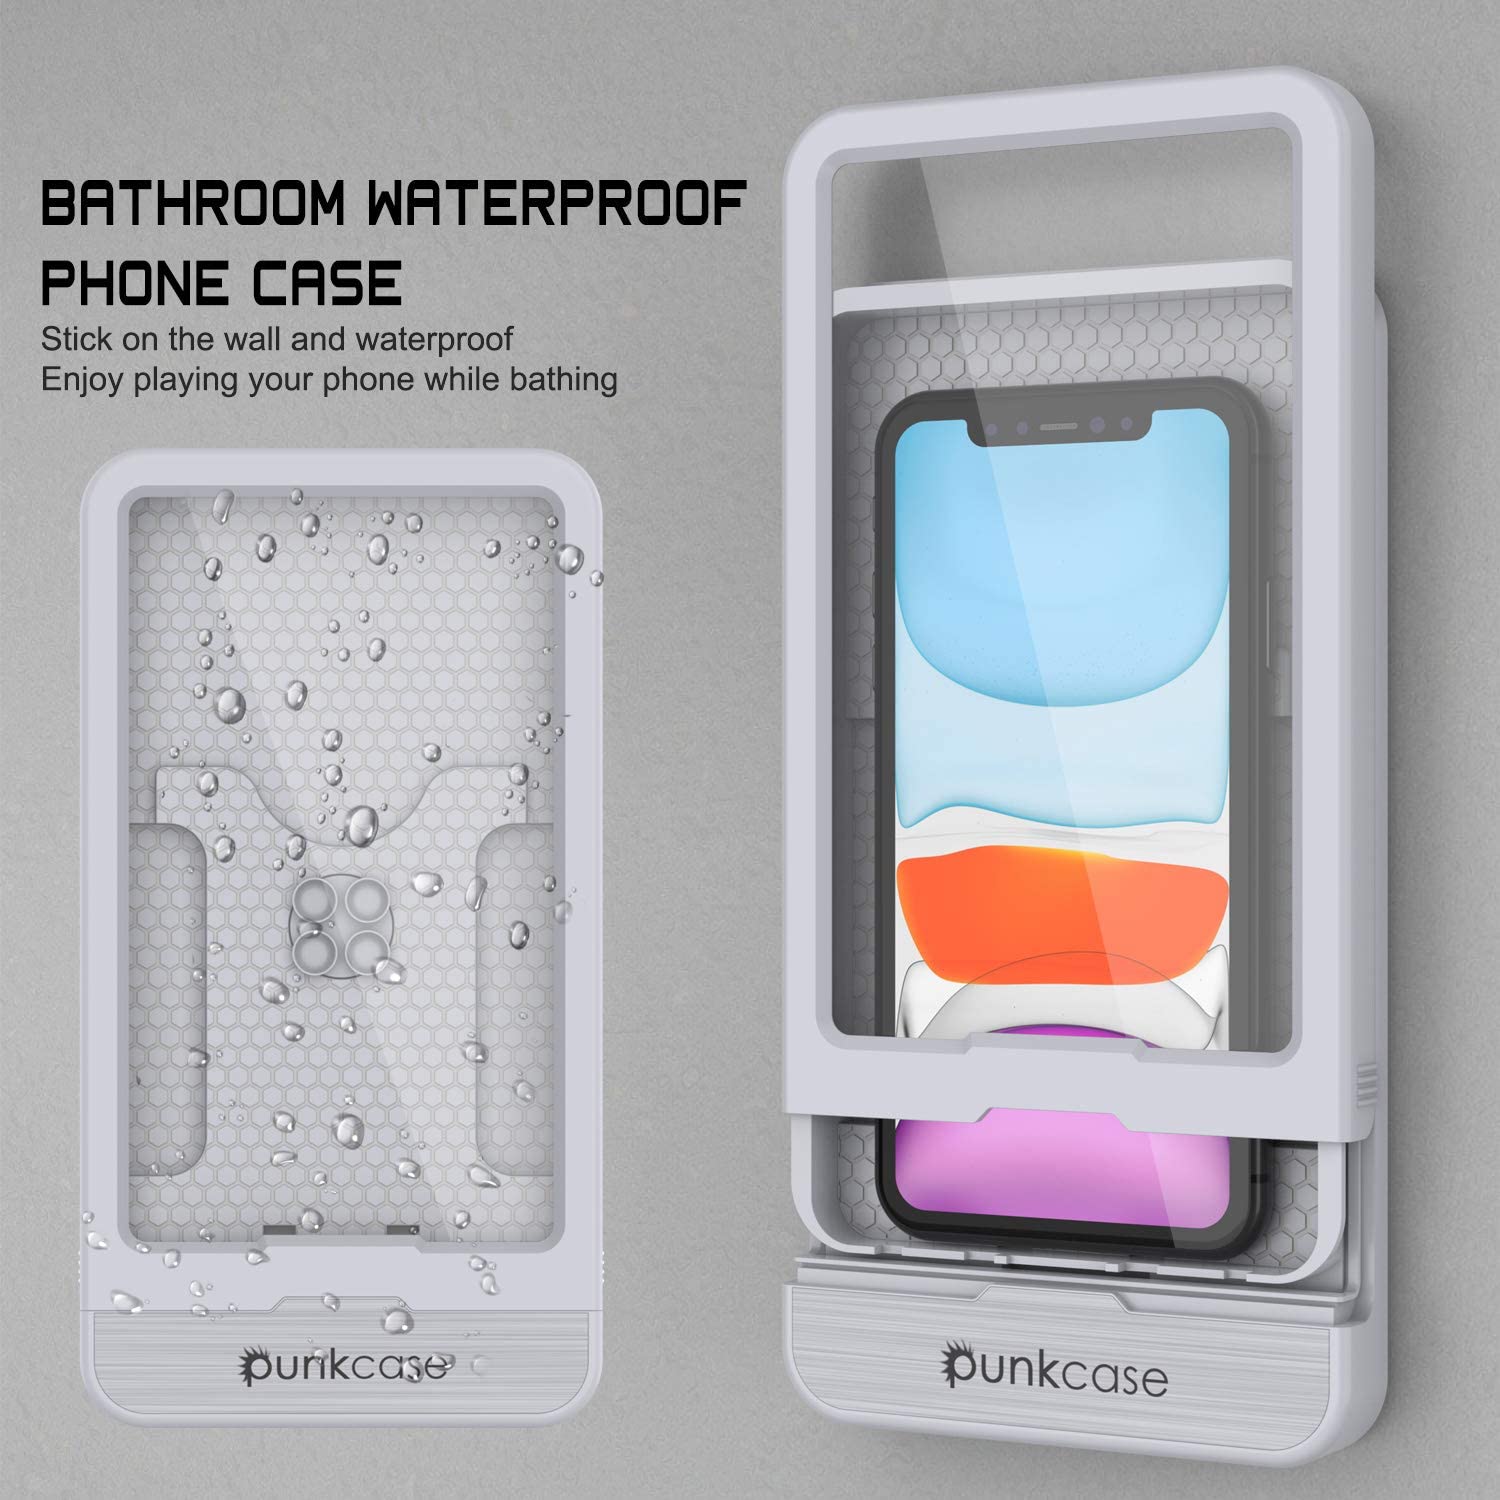 https://www.punkcase.com/cdn/shop/products/punkcase_bathroom_phone_holder_universal_waterproof_shower_case_w_full_touch_screen_control_suitable_for_all_phones_up_to_6_7_easy_installation_on_most_surfaces_bath_shower_with_your_6618ec46-793a-4b9f-847b-0ada7893f7dc.jpg?v=1607102155